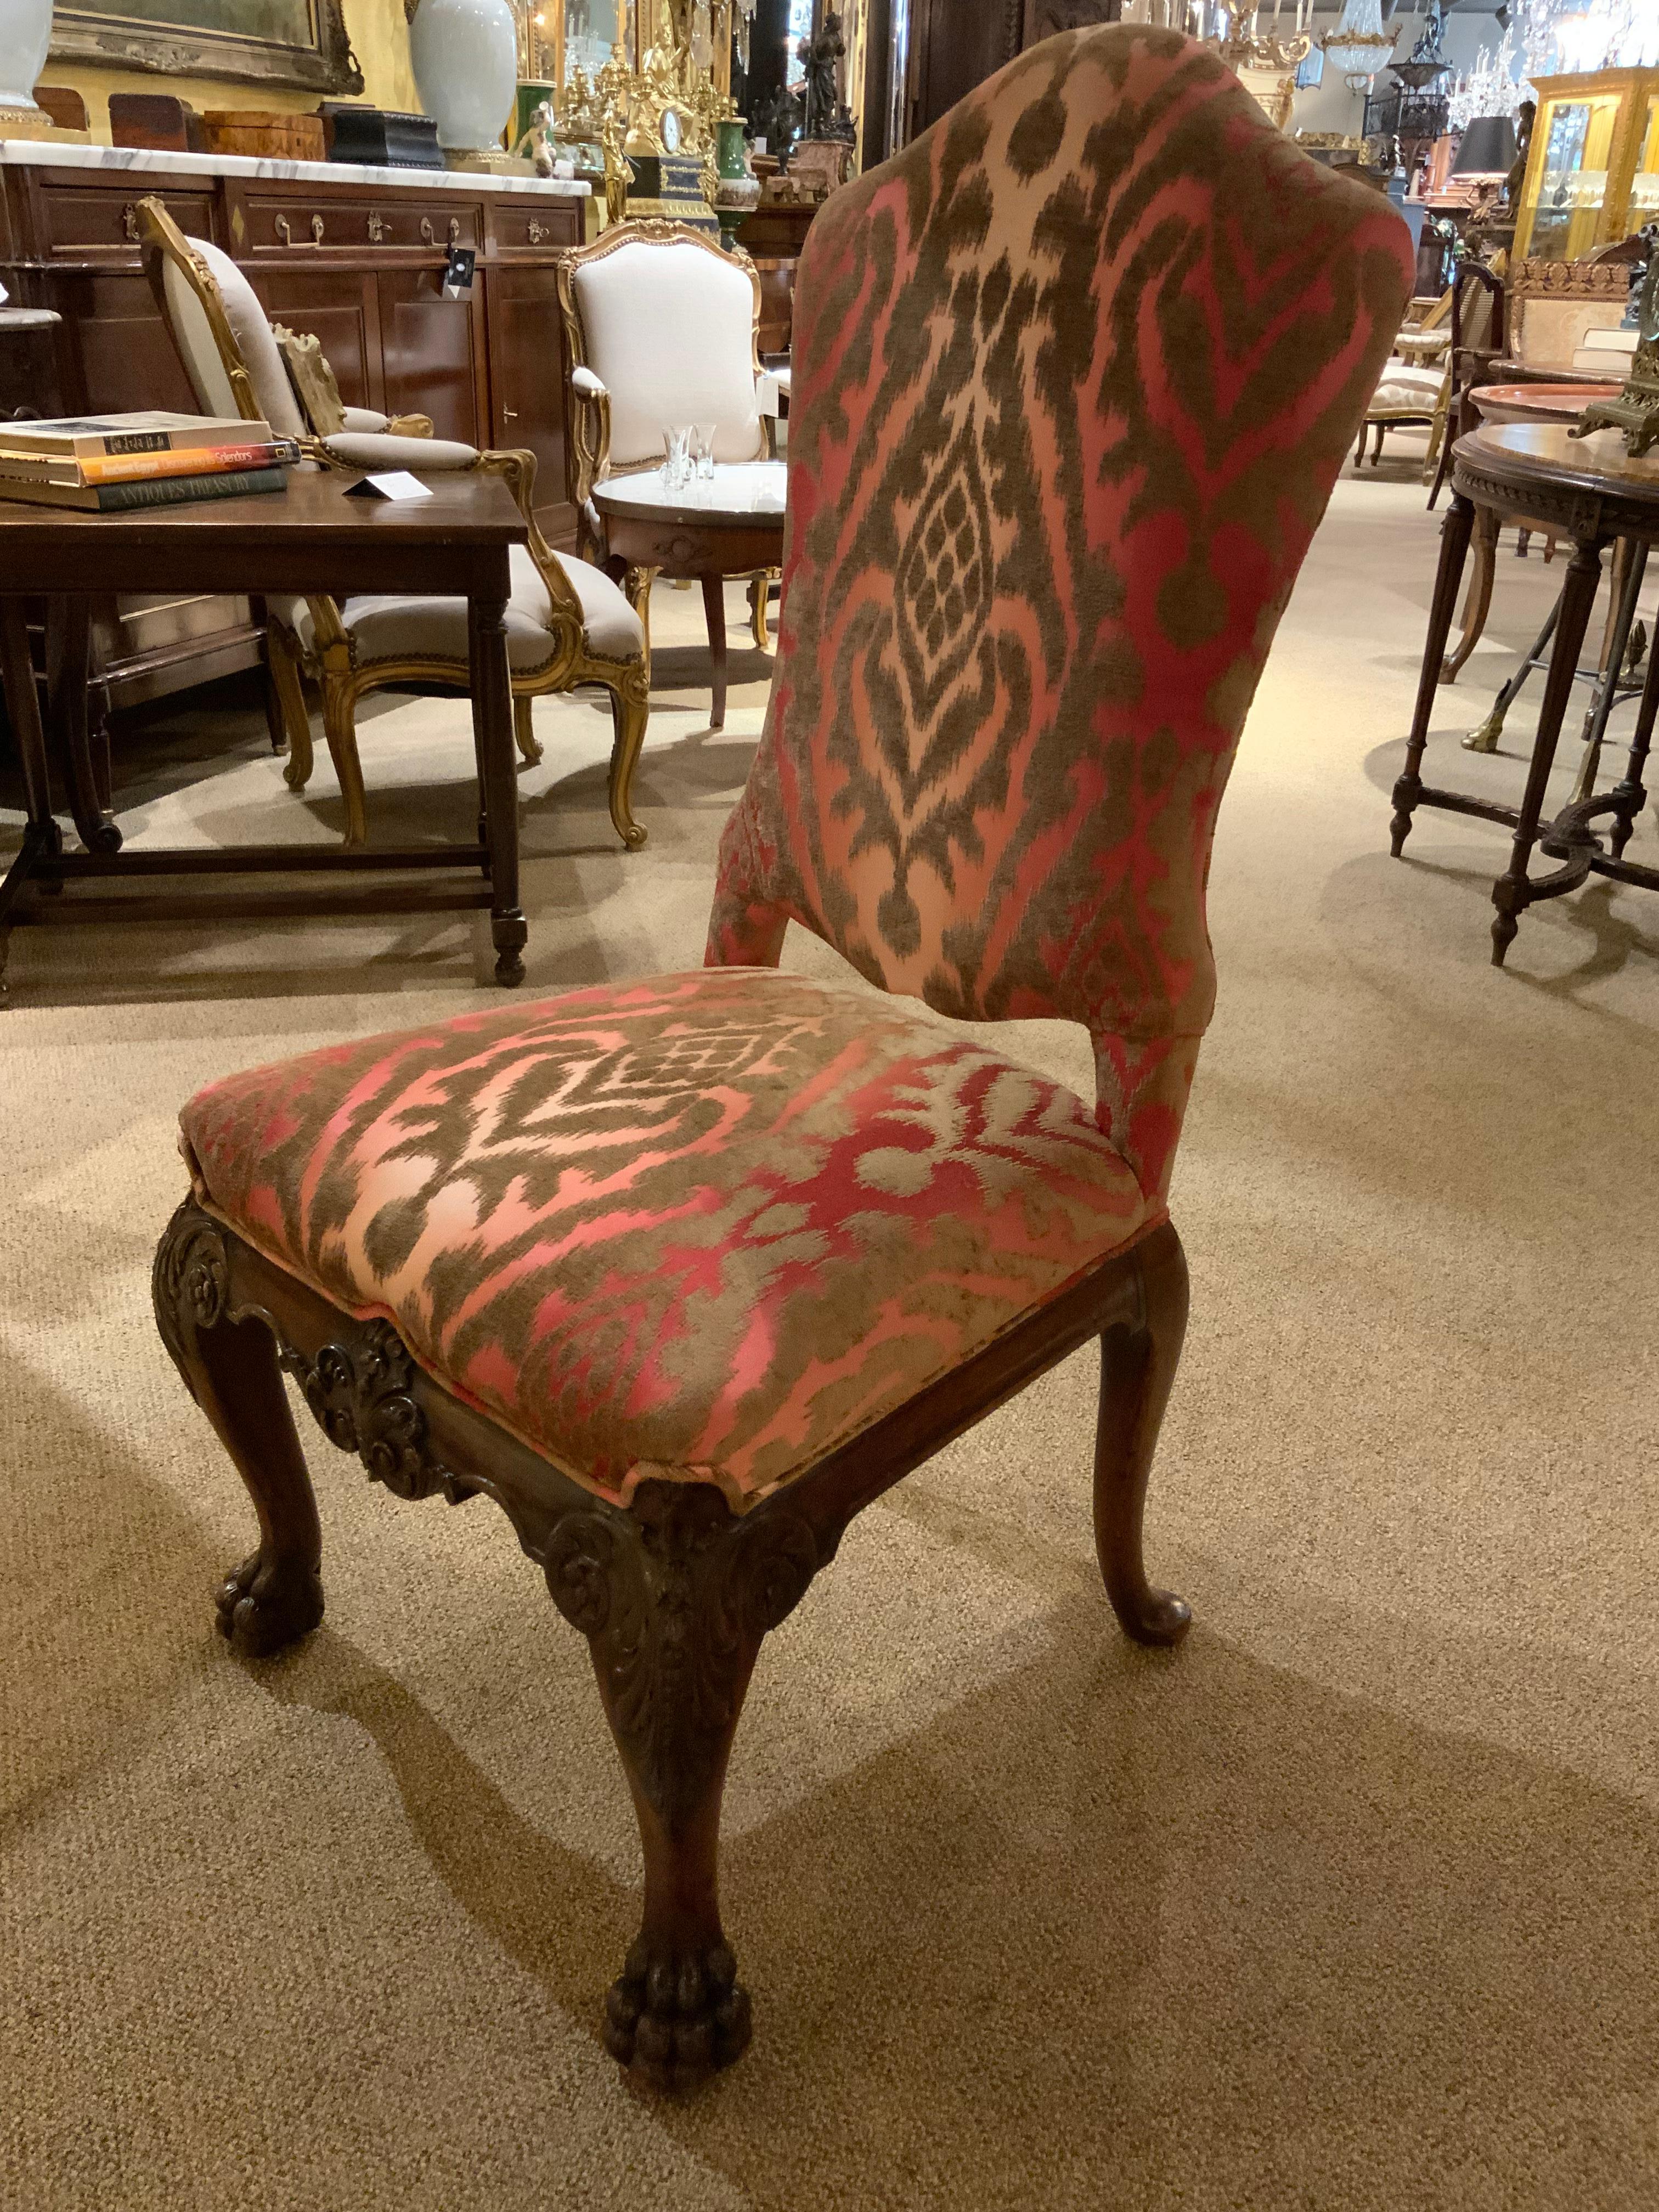 Great quality dining chairs which are very comfortable as well as stylish and
Beautiful. The fabric is a high end designer fabric that is immaculate. The wood
Is a dark walnut and has a carved frame with a carved foot.